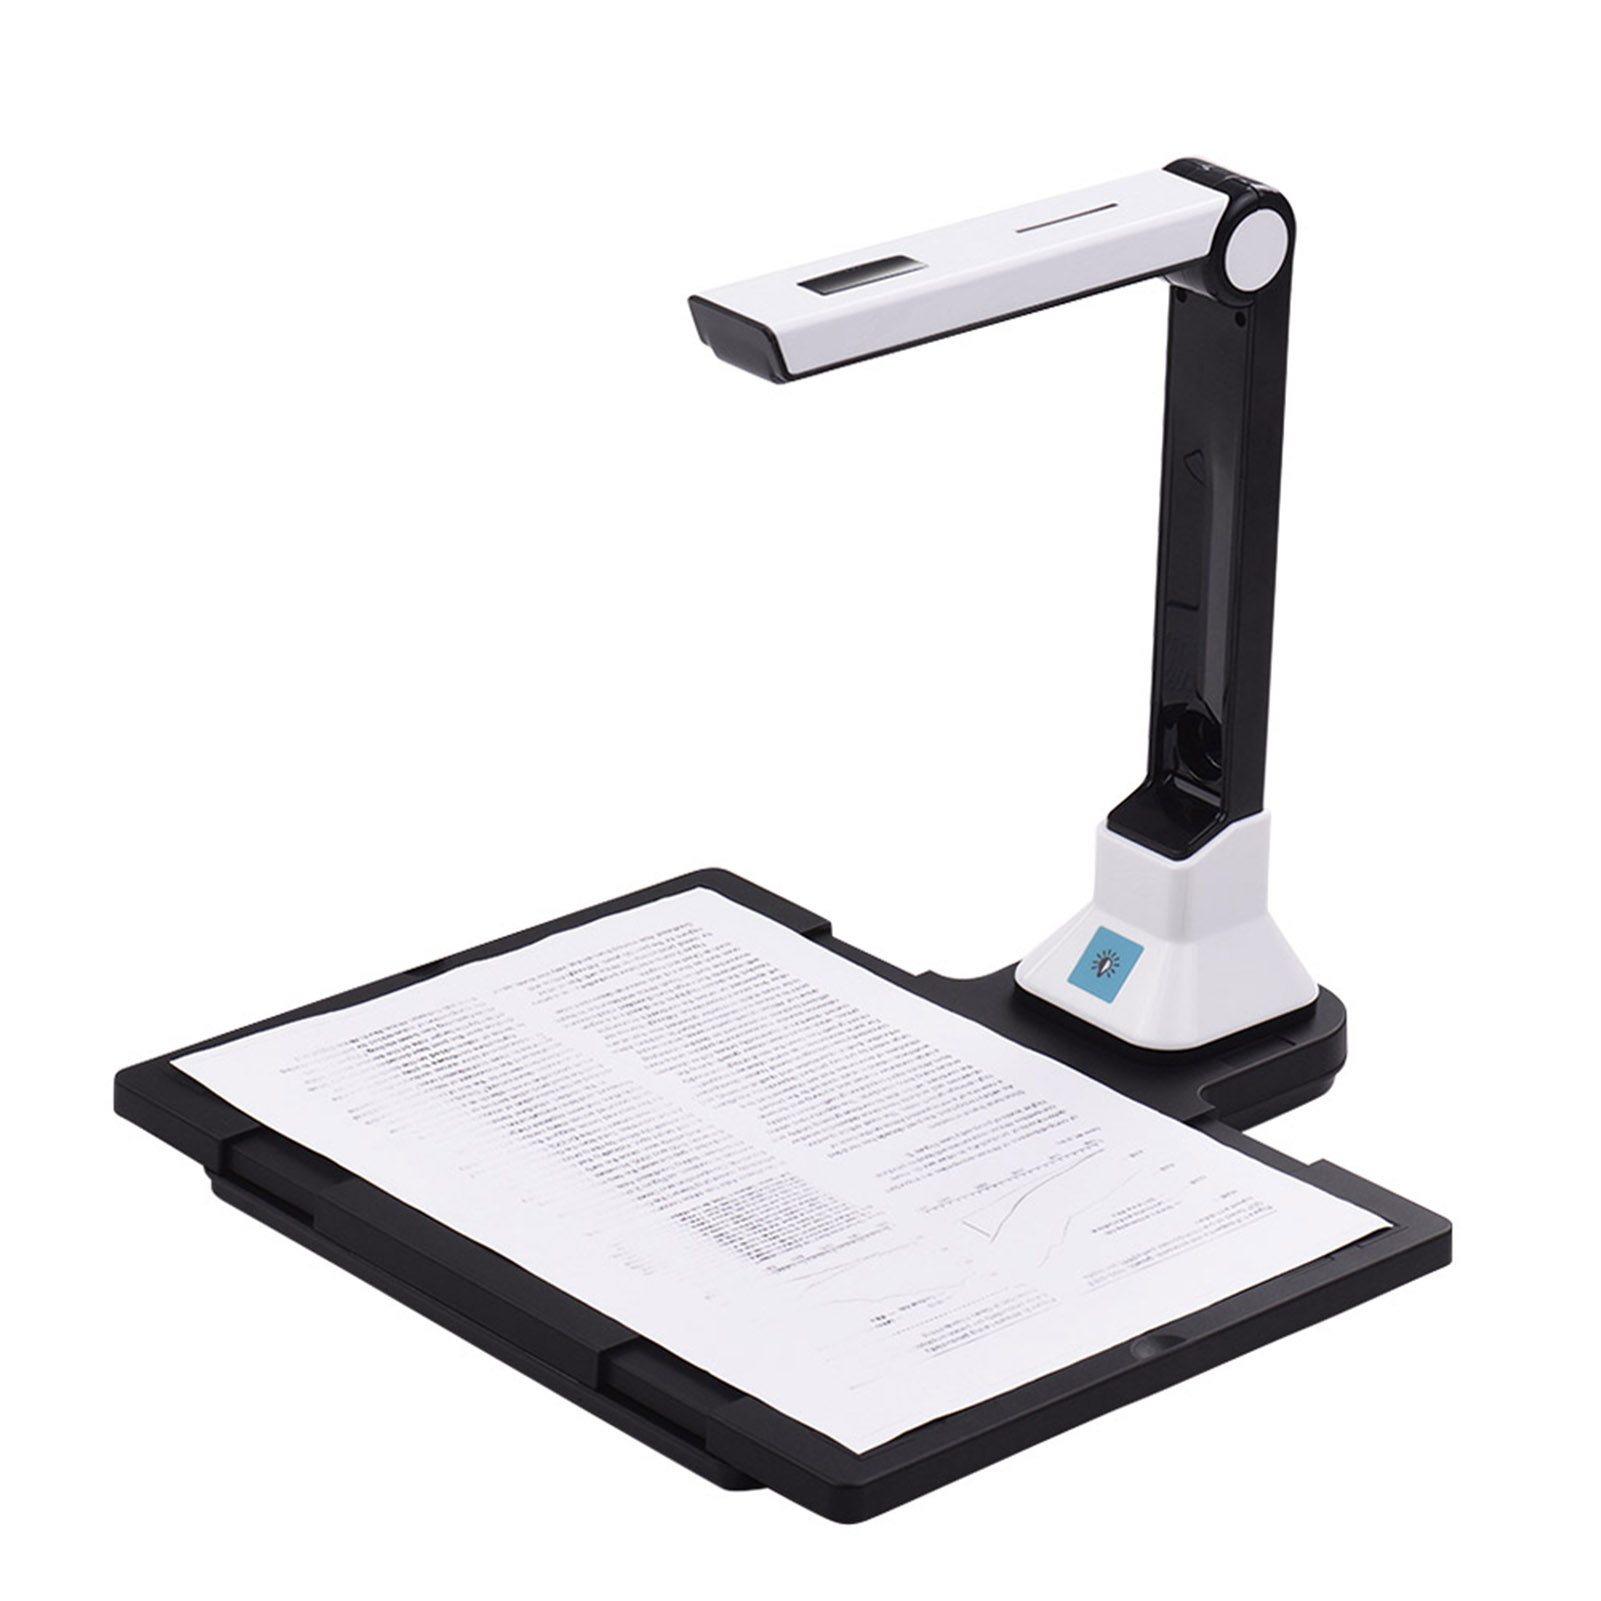 Tomshine BK50 Portable 10 -pixel High Definition Scanner Capture Size A4 Document with Hard Plate for Passport File Documents Recognition Support 7 Languages German/ Russian/ French/ Japanese/ Spa - image 1 of 7